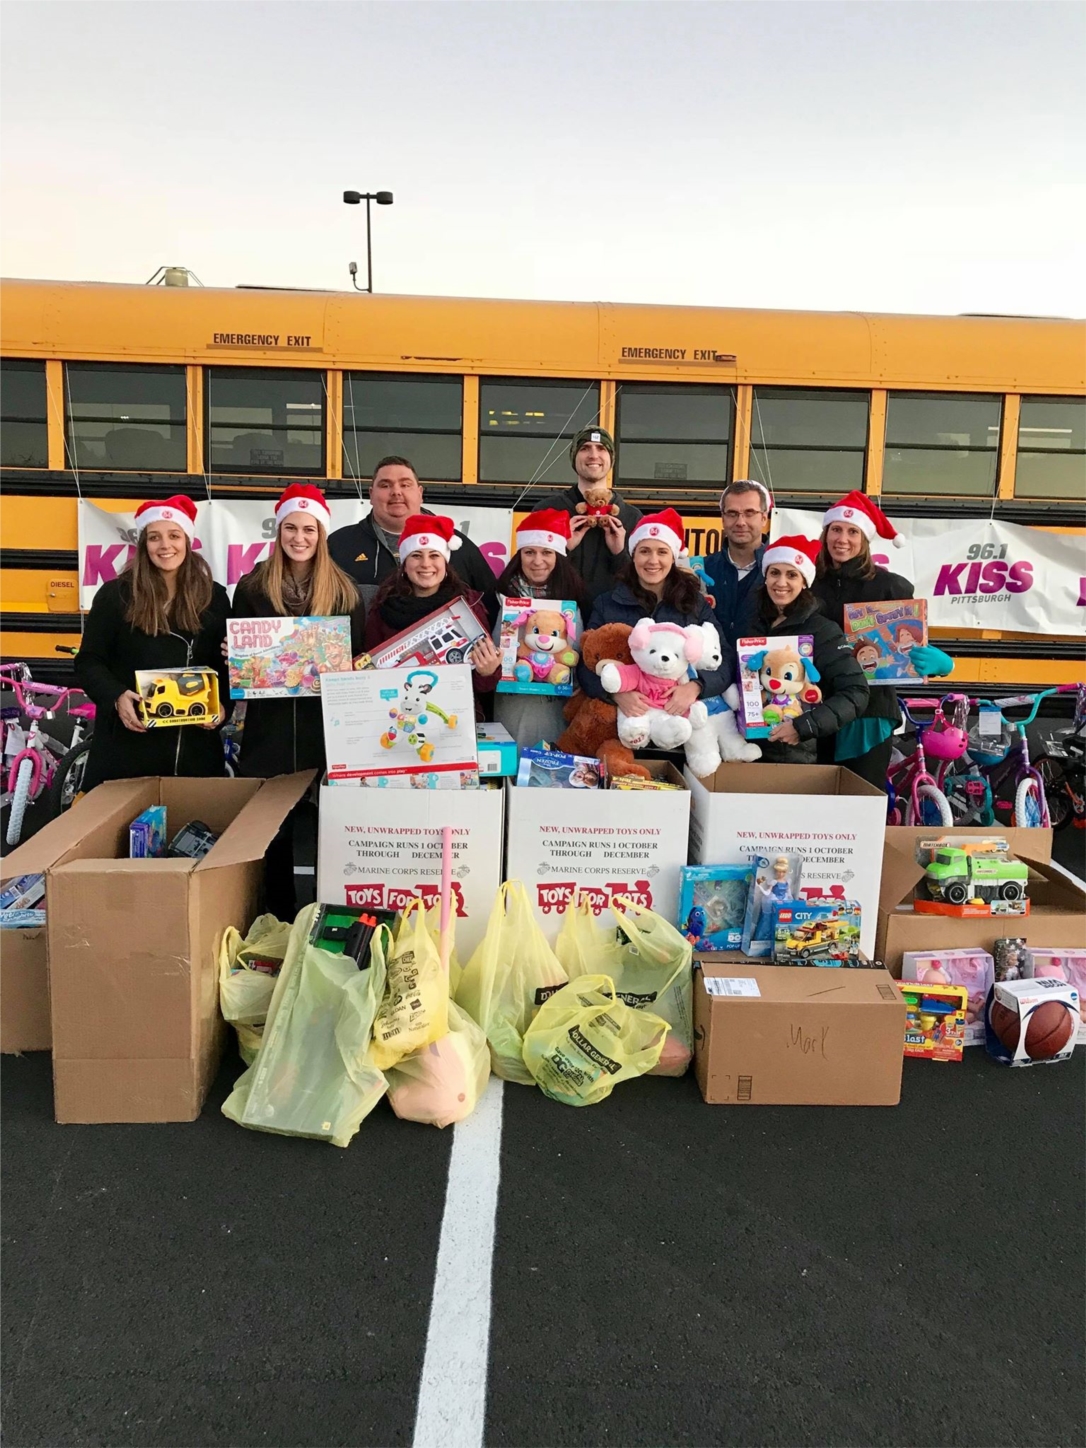 84 Lumber associates at Stuff-A-Bus 2017

We were a sponsor of the event, which is held every year to collect toys for and bring awareness to Toys for Tots.
